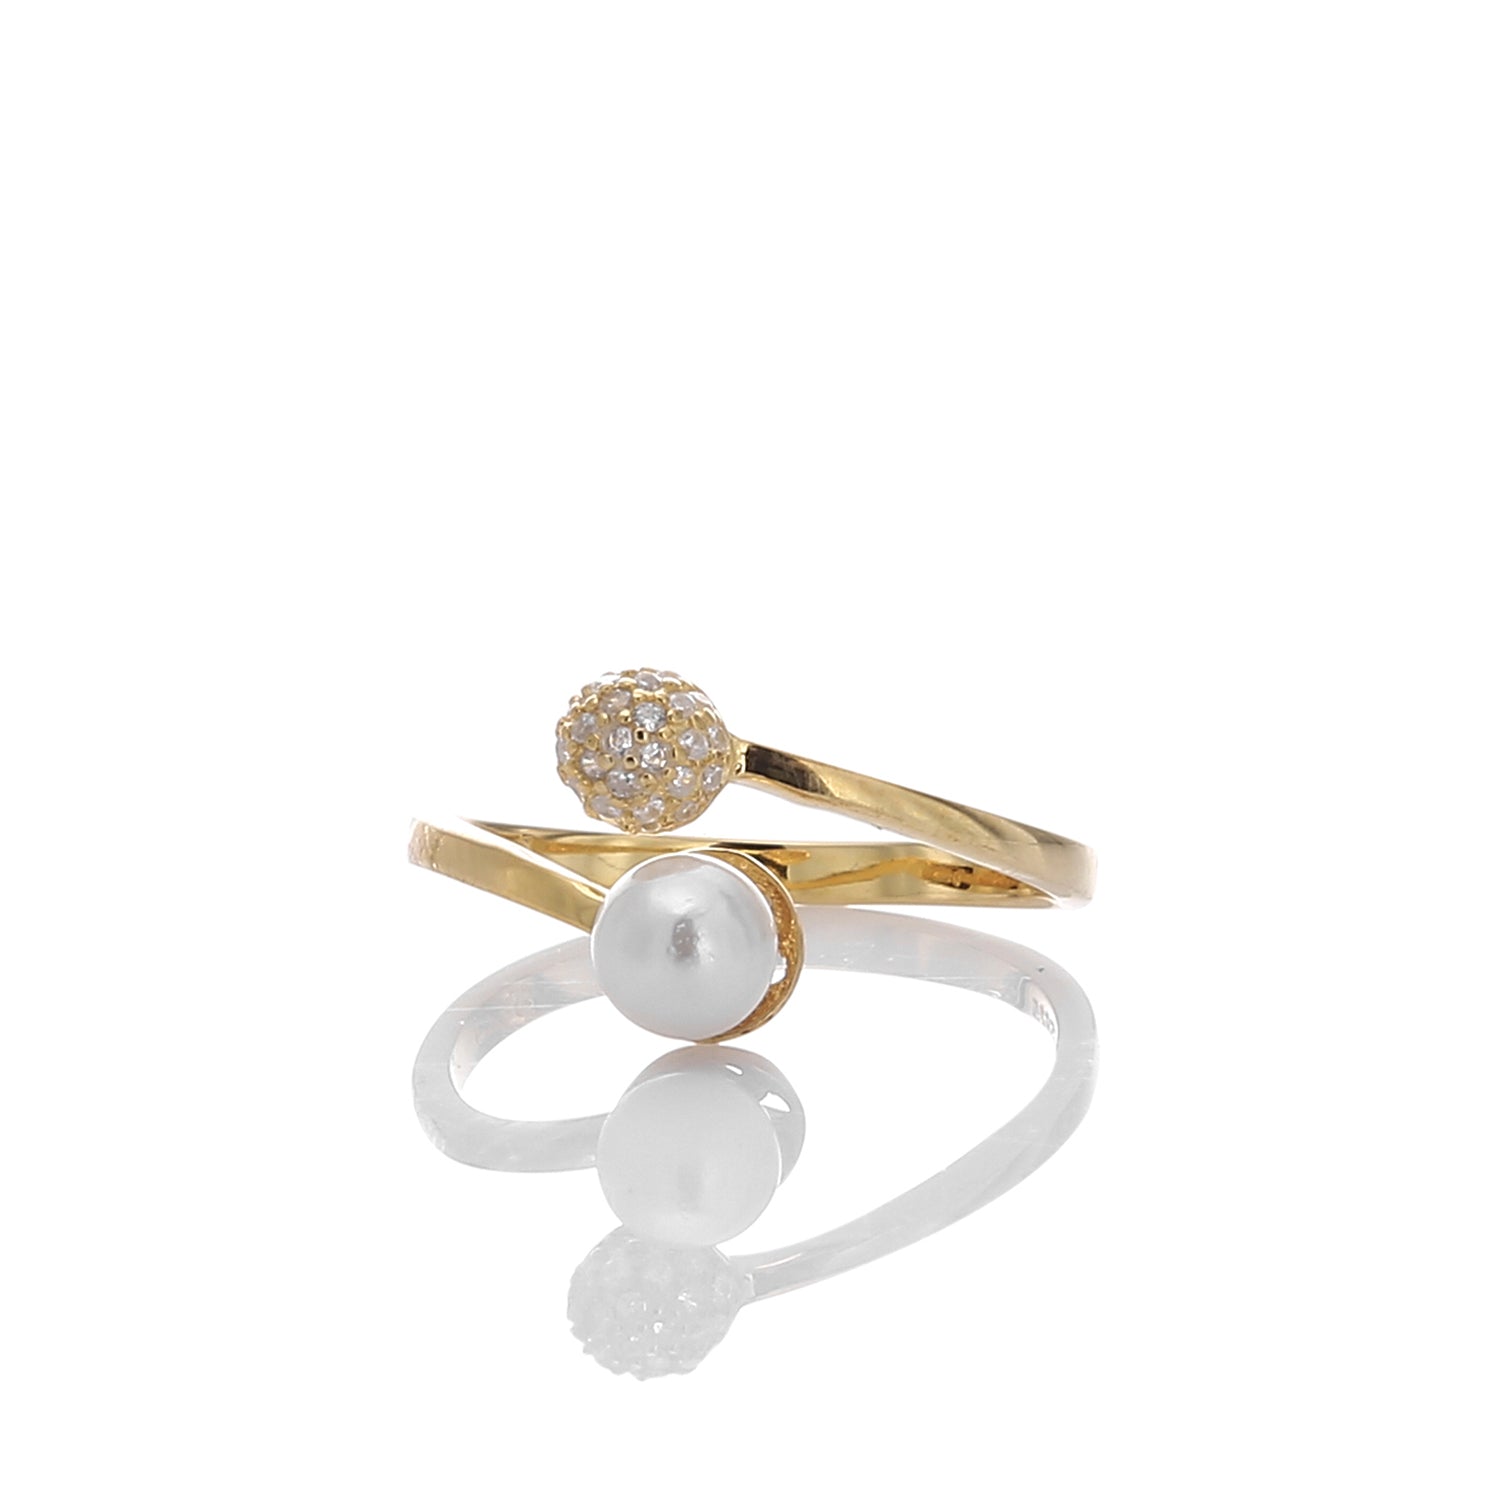 Luminous Glow White Crystal and Pearl Adjustable Ring - ARJWR1039GD ARCADIO